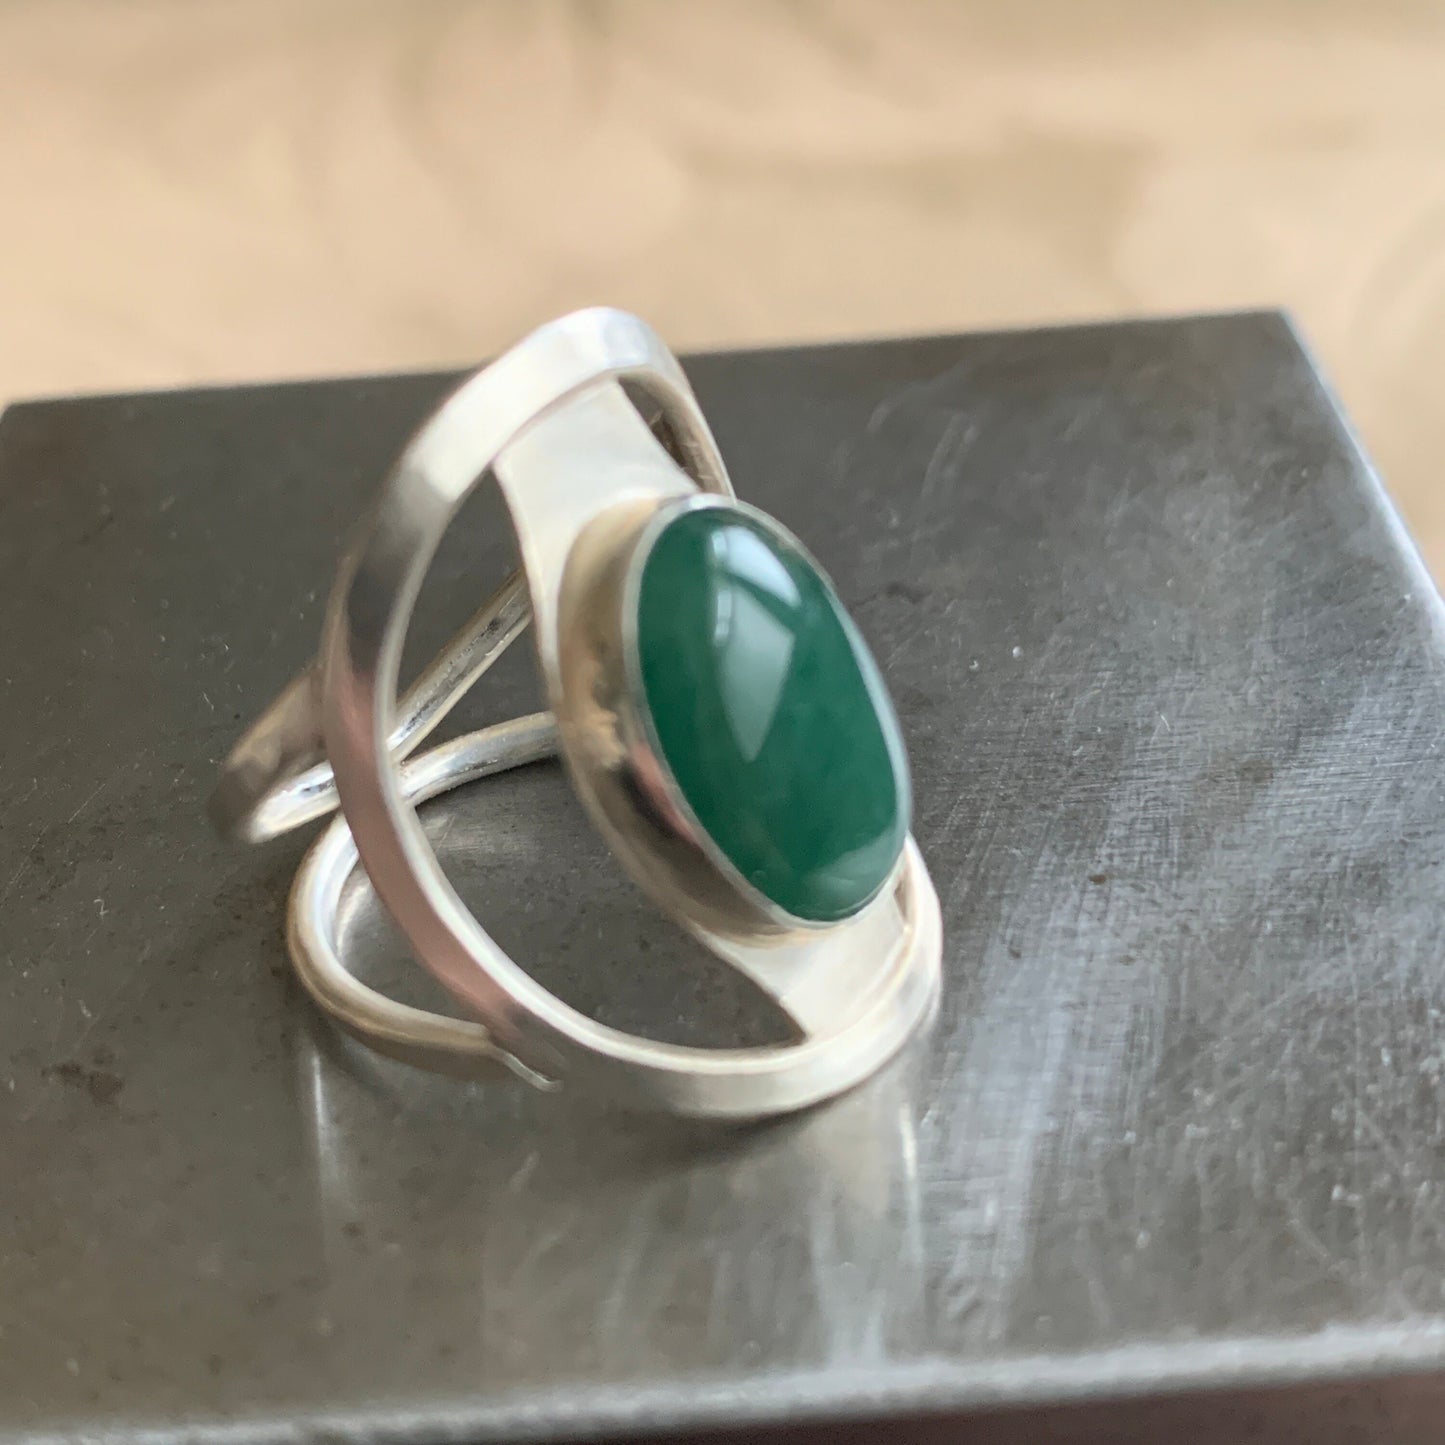 Ring, saddle ring in sterling silver, green gemstone jewelry, handmade silver ring